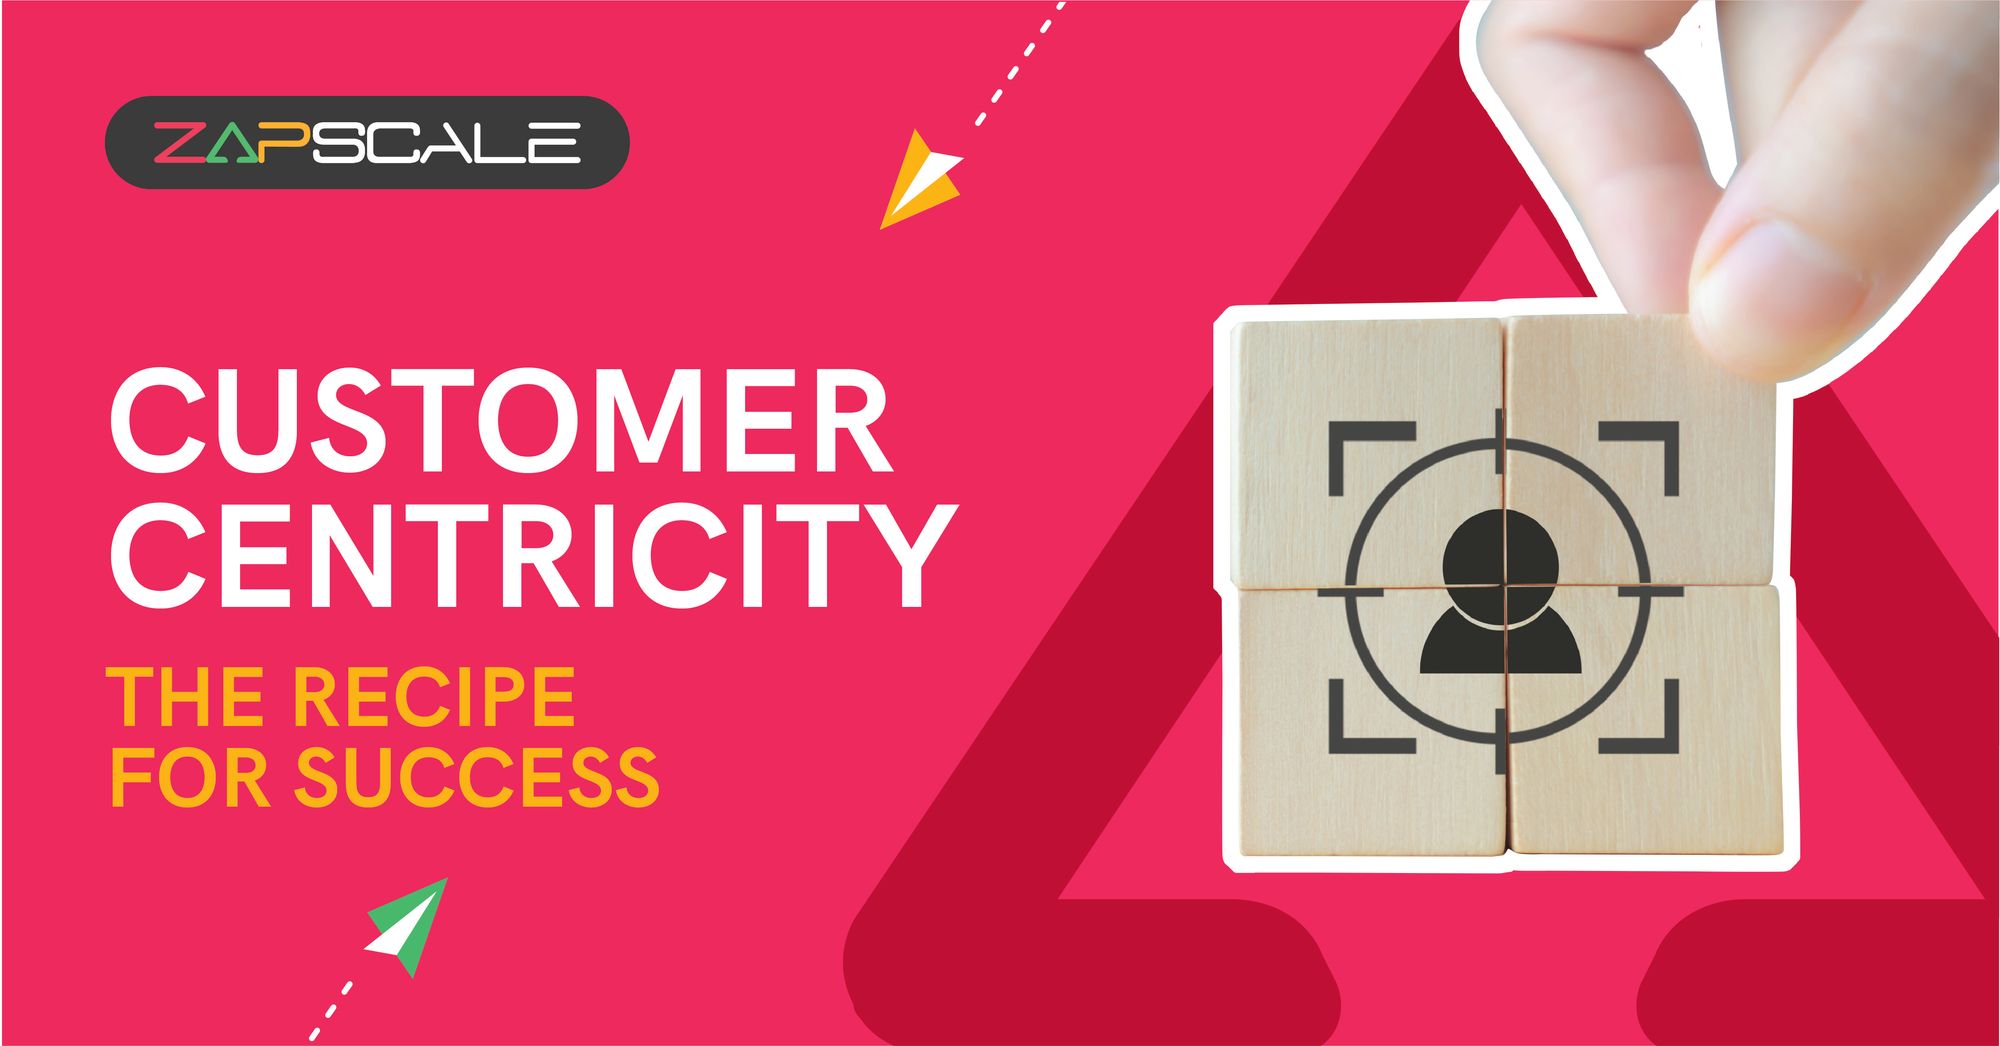 Why is a Customer-Centric culture necessary for Customer Success?